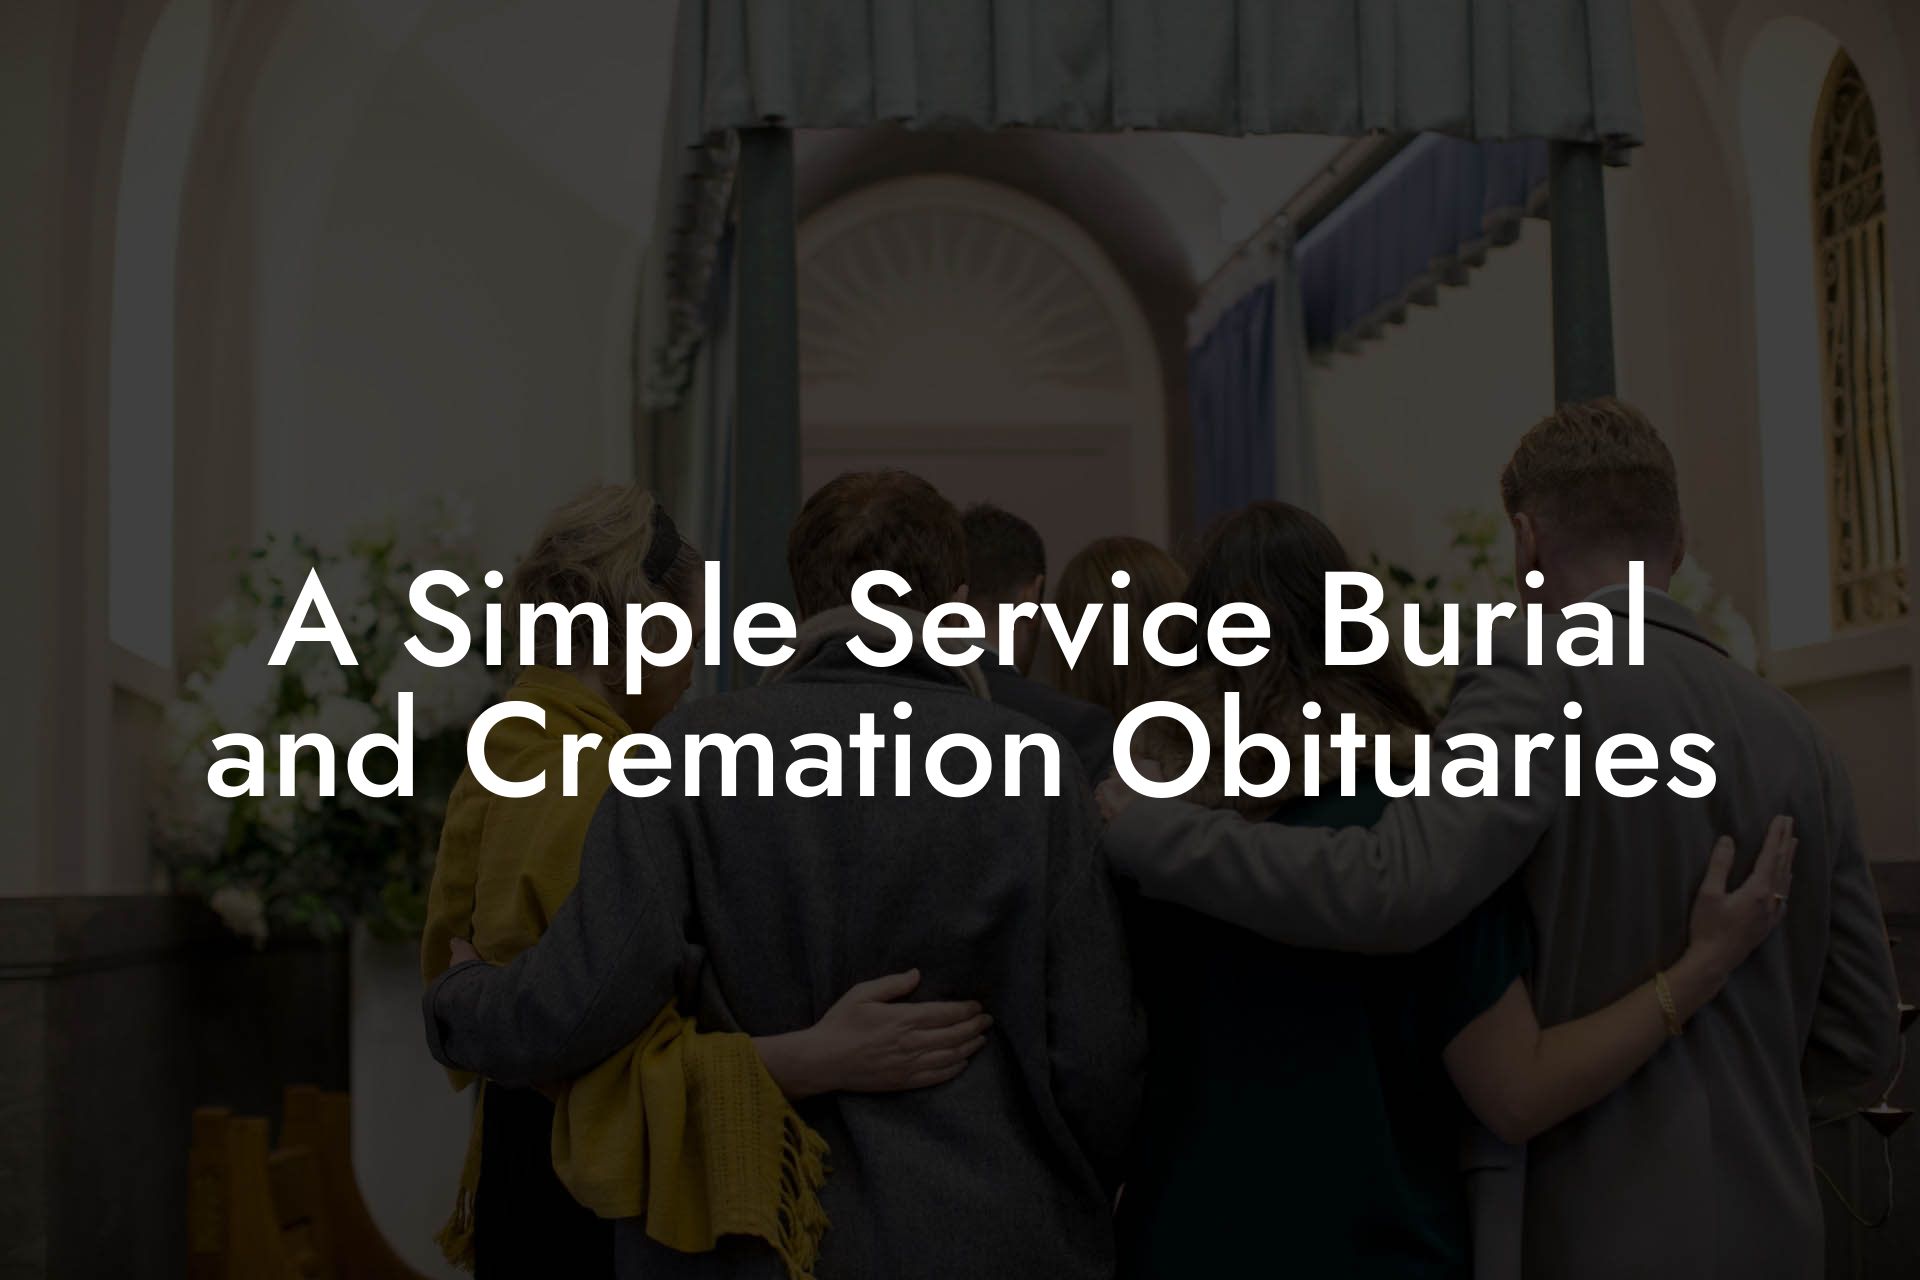 A Simple Service Burial and Cremation Obituaries